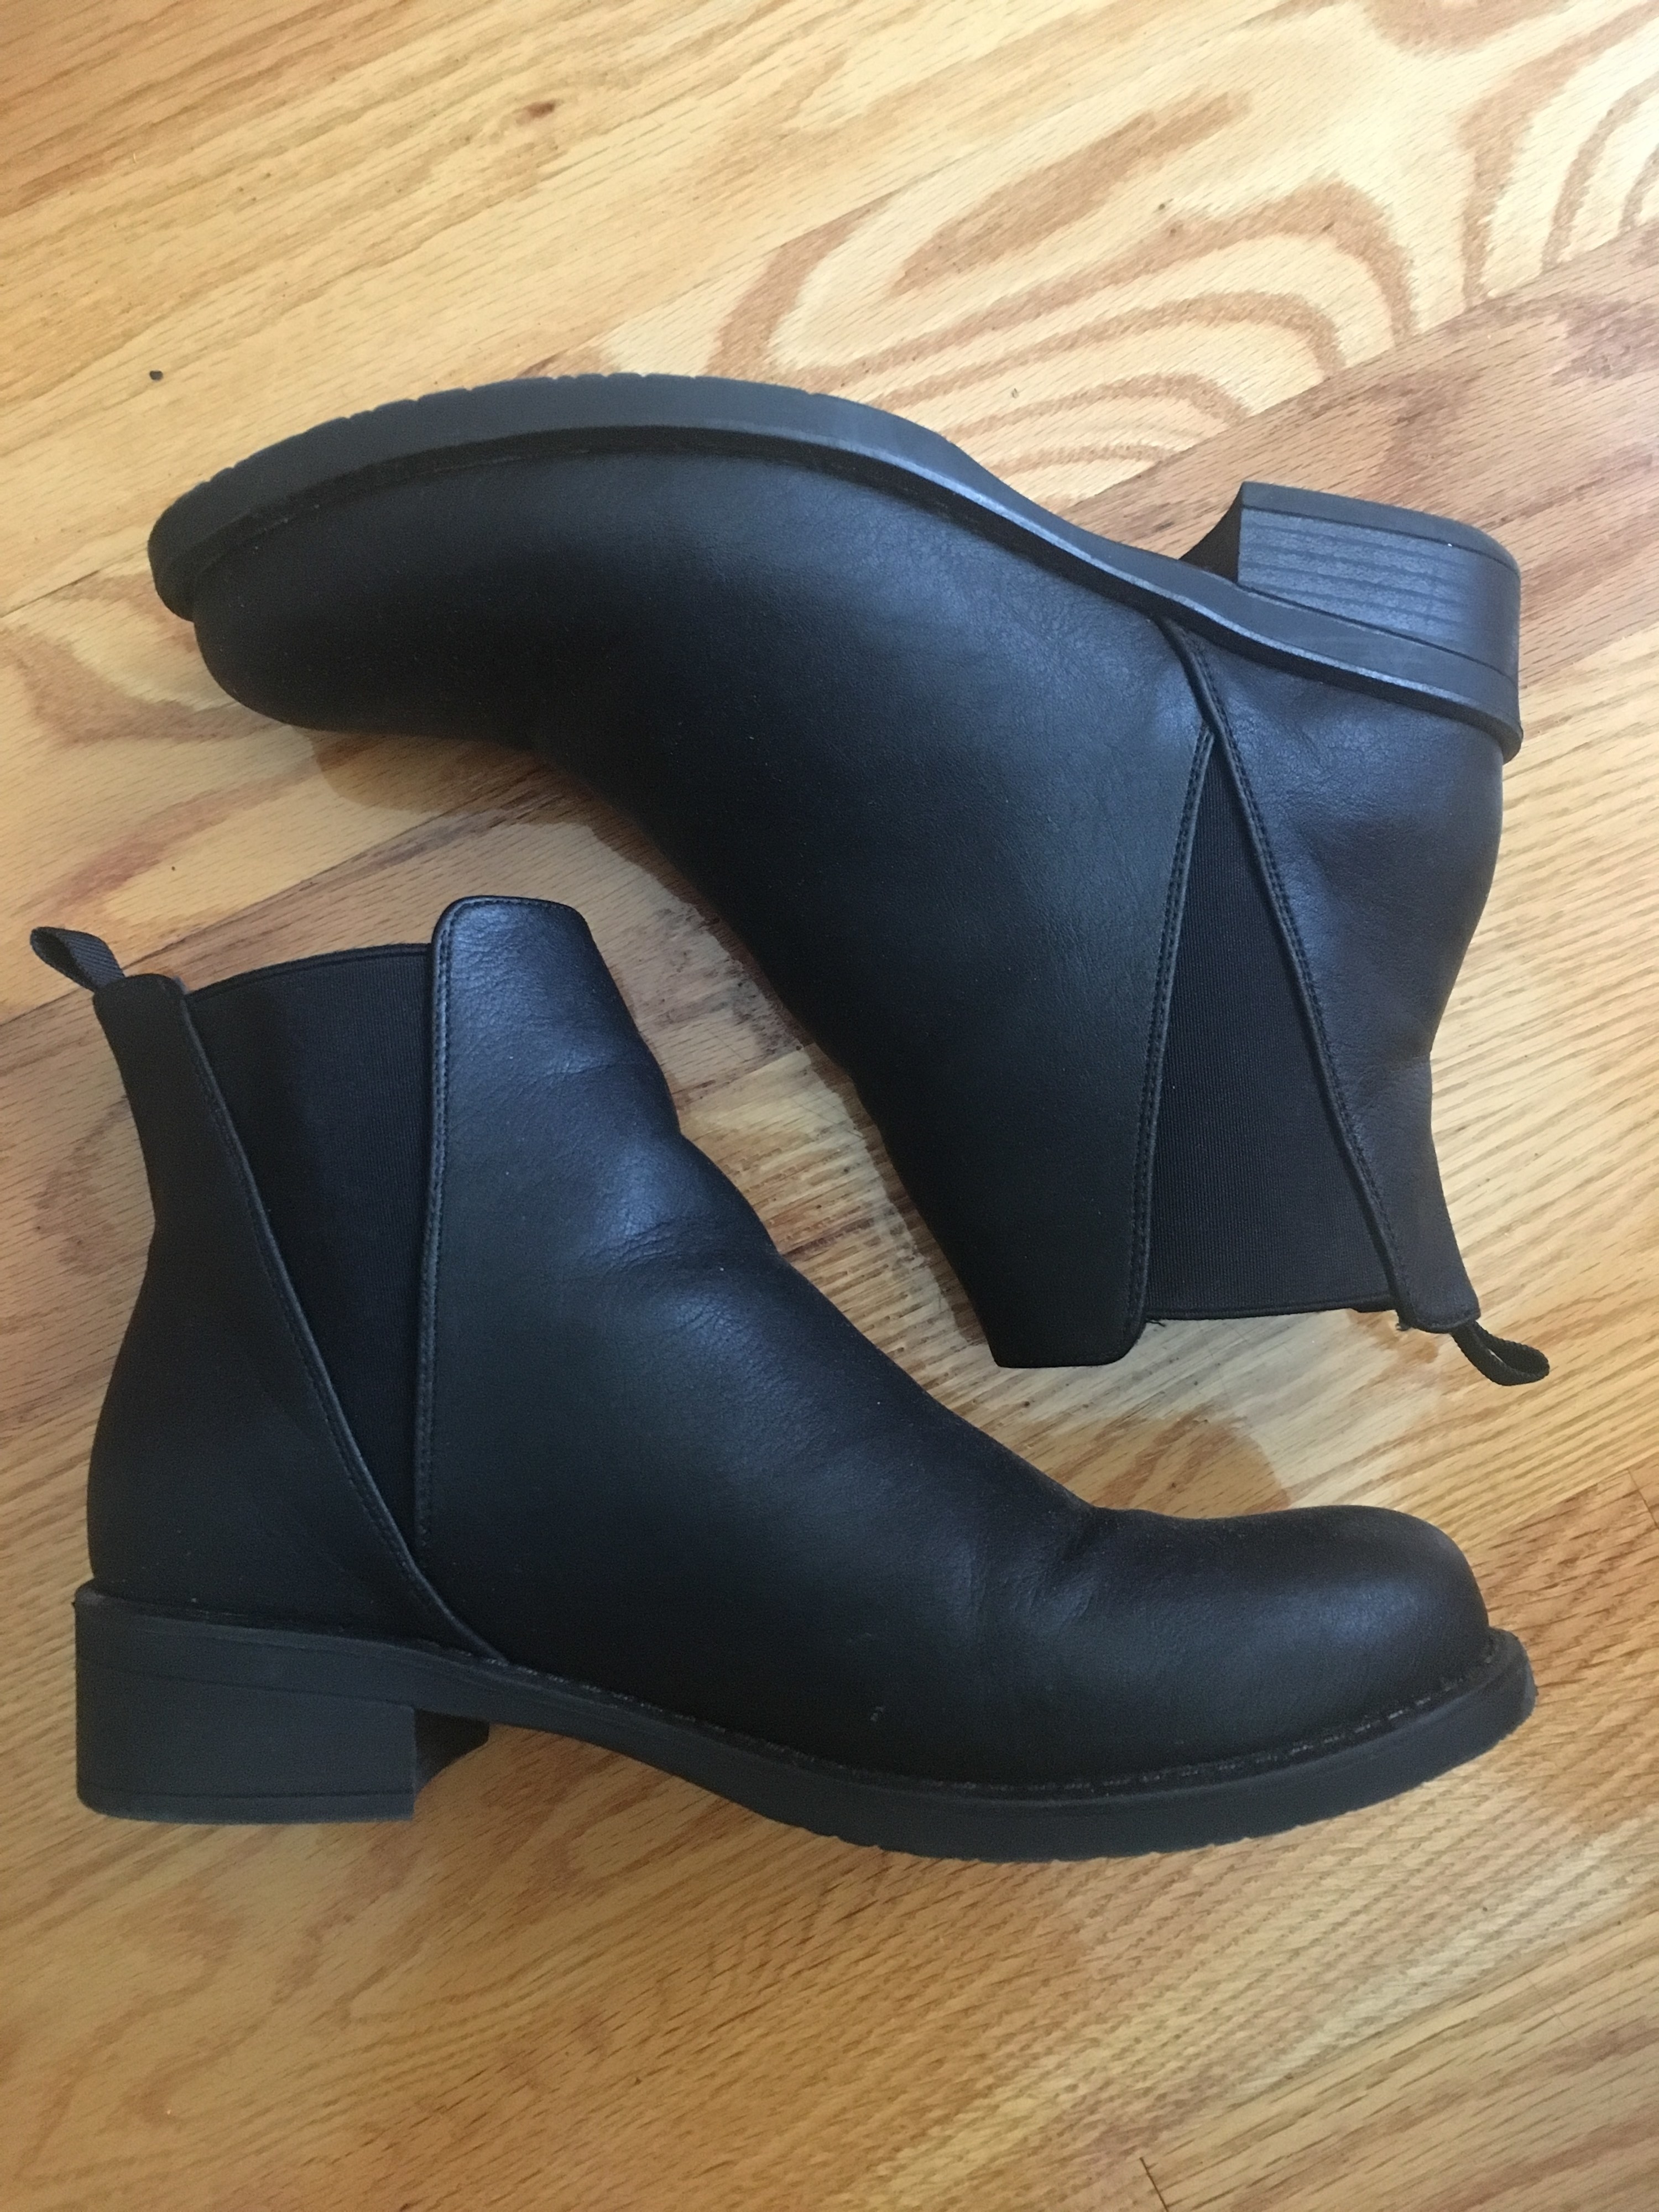 black boots with a one-inch chunky heel